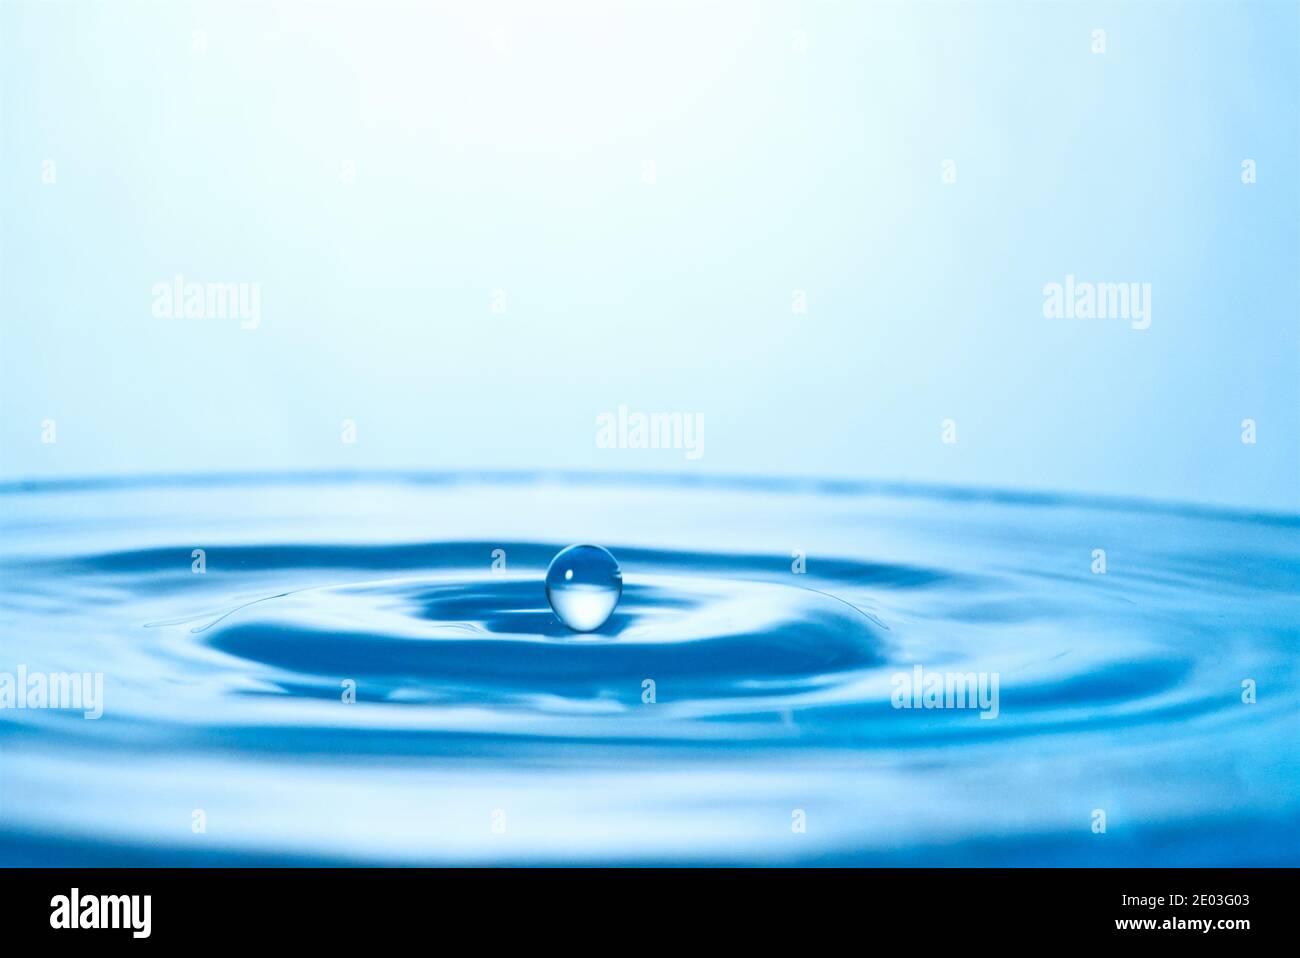 Water splashes and ripples background, freeze motion, falling drop, blue ripple Stock Photo